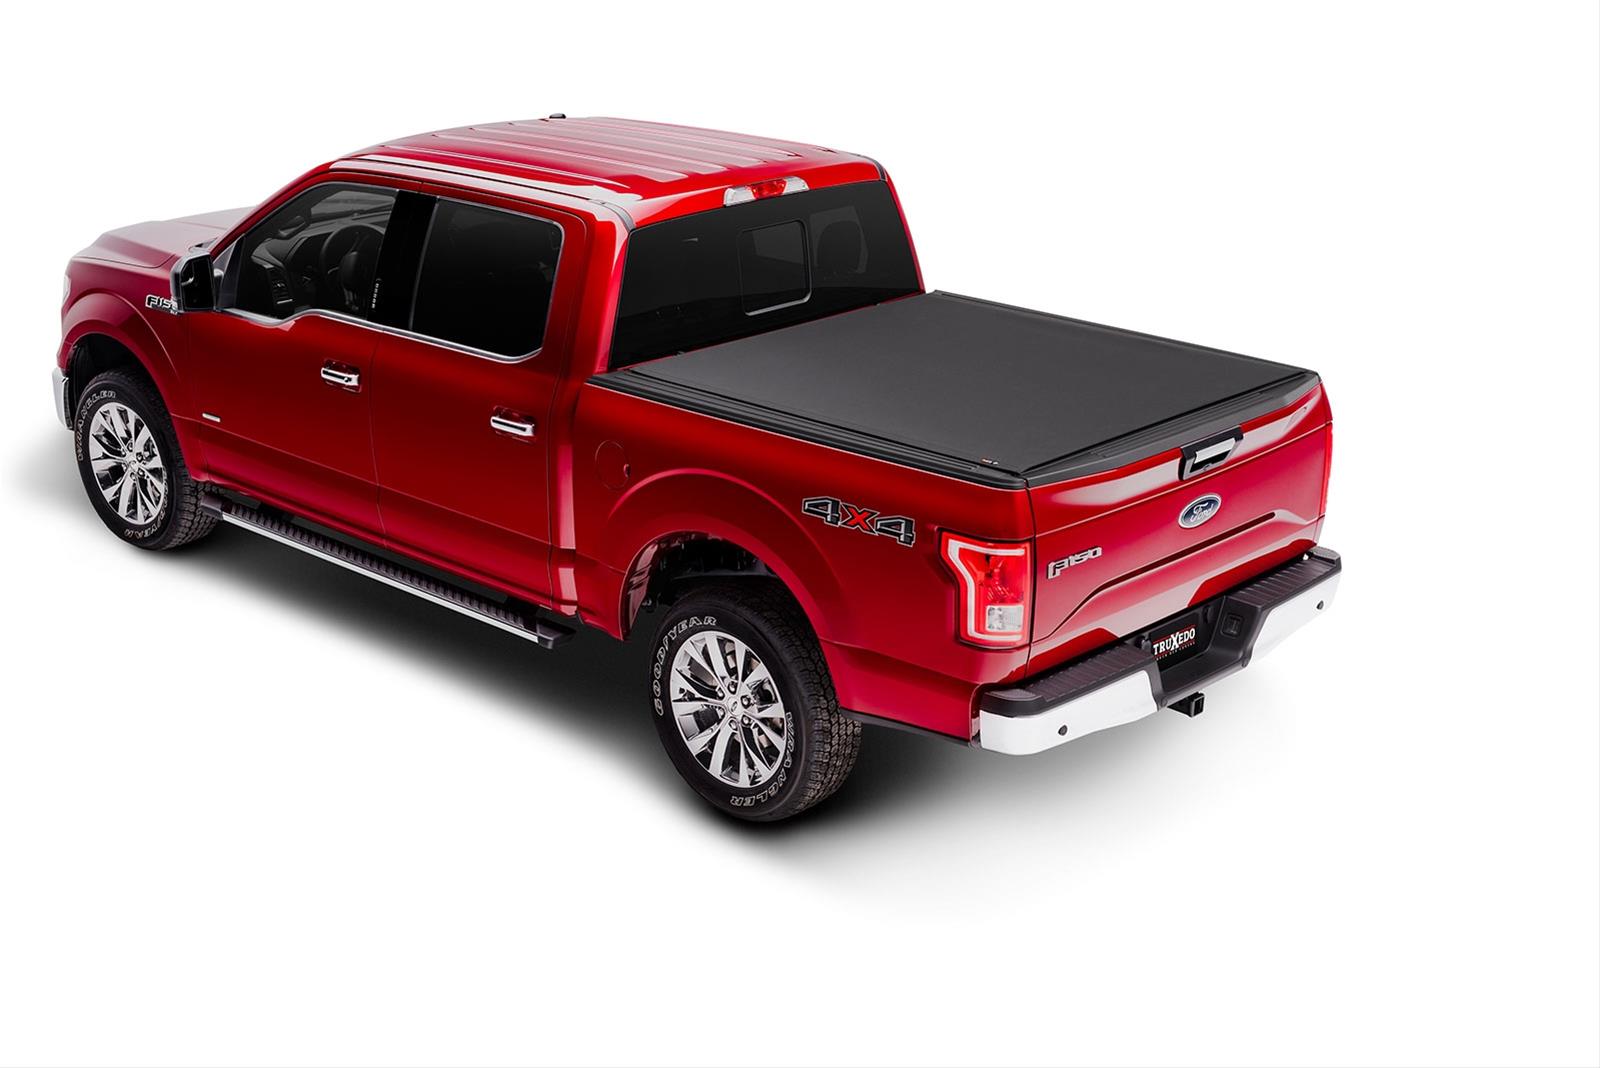 TruXedo Pro X15 Soft Roll Up Tonneau Cover 2019-up Ram 6'4" Bed